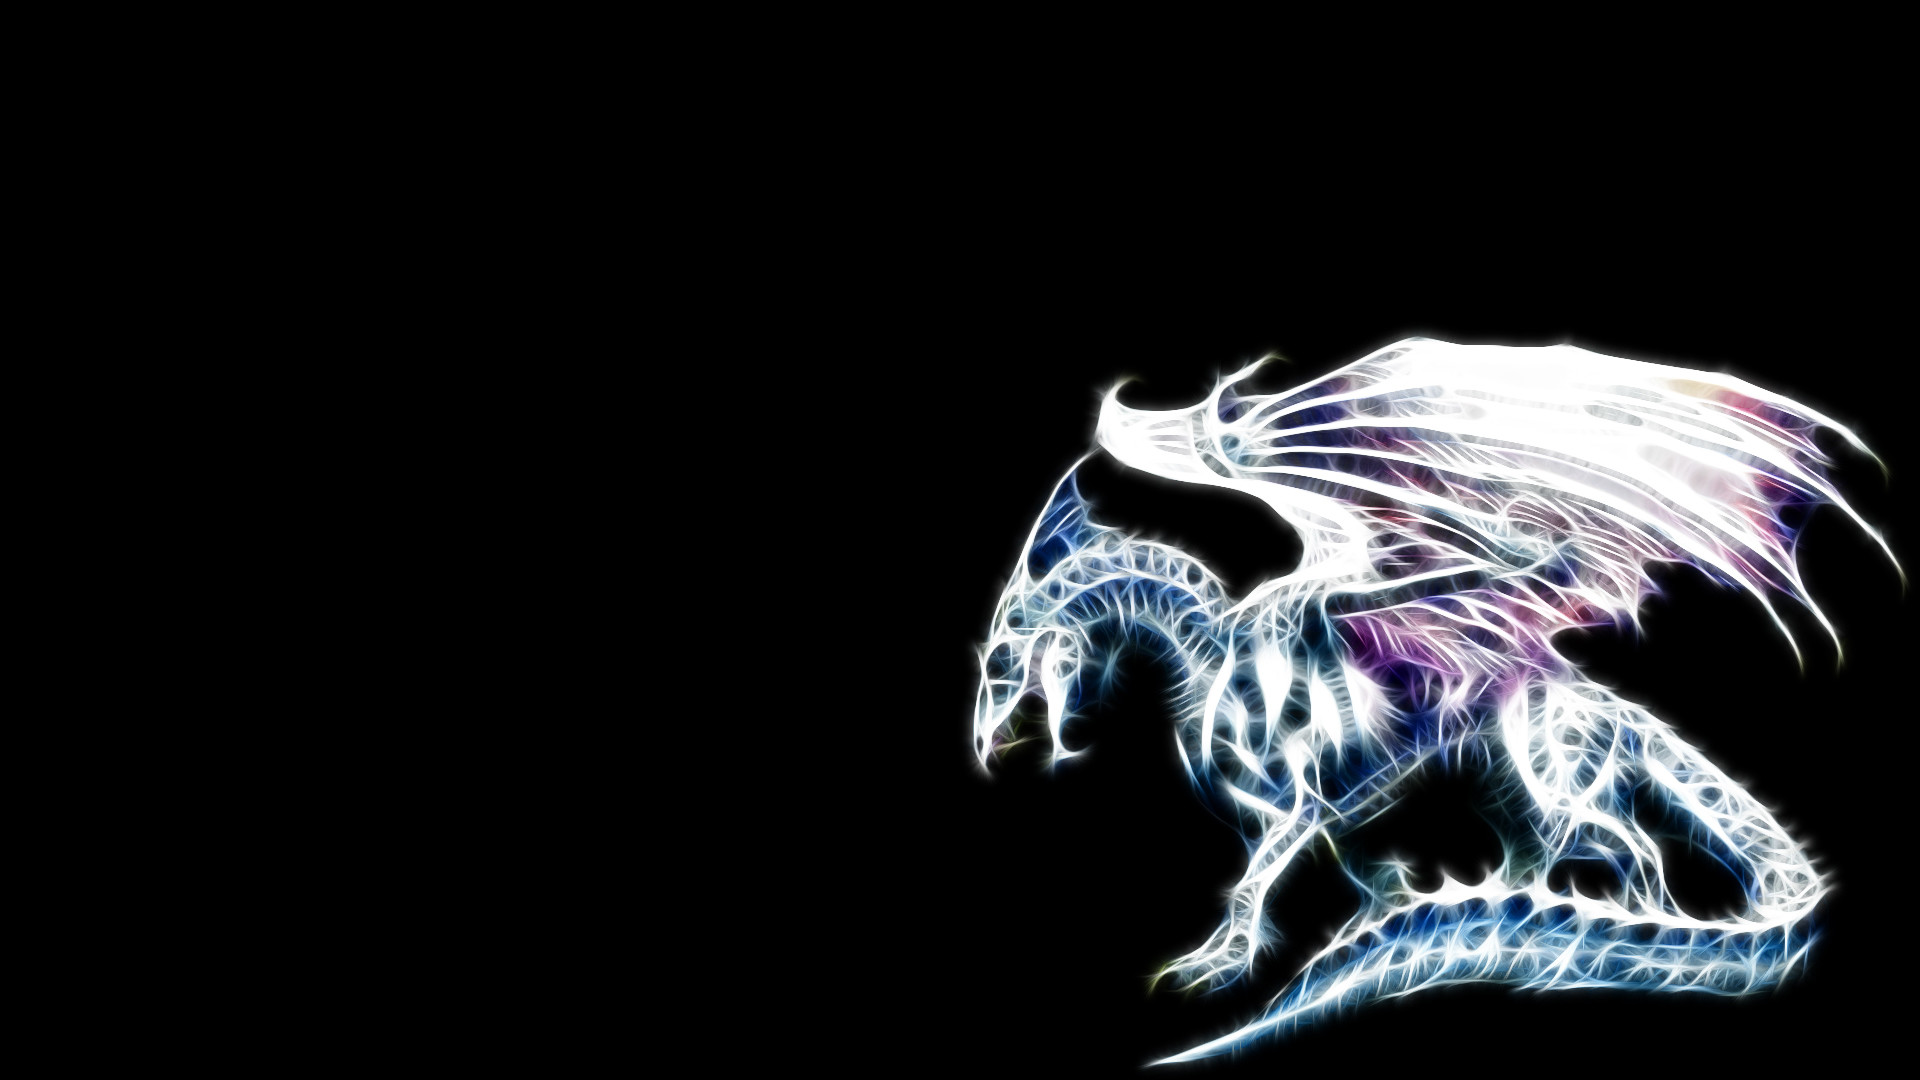 1920x1080 Wallpapers Collection Â«Dragon WallpapersÂ»